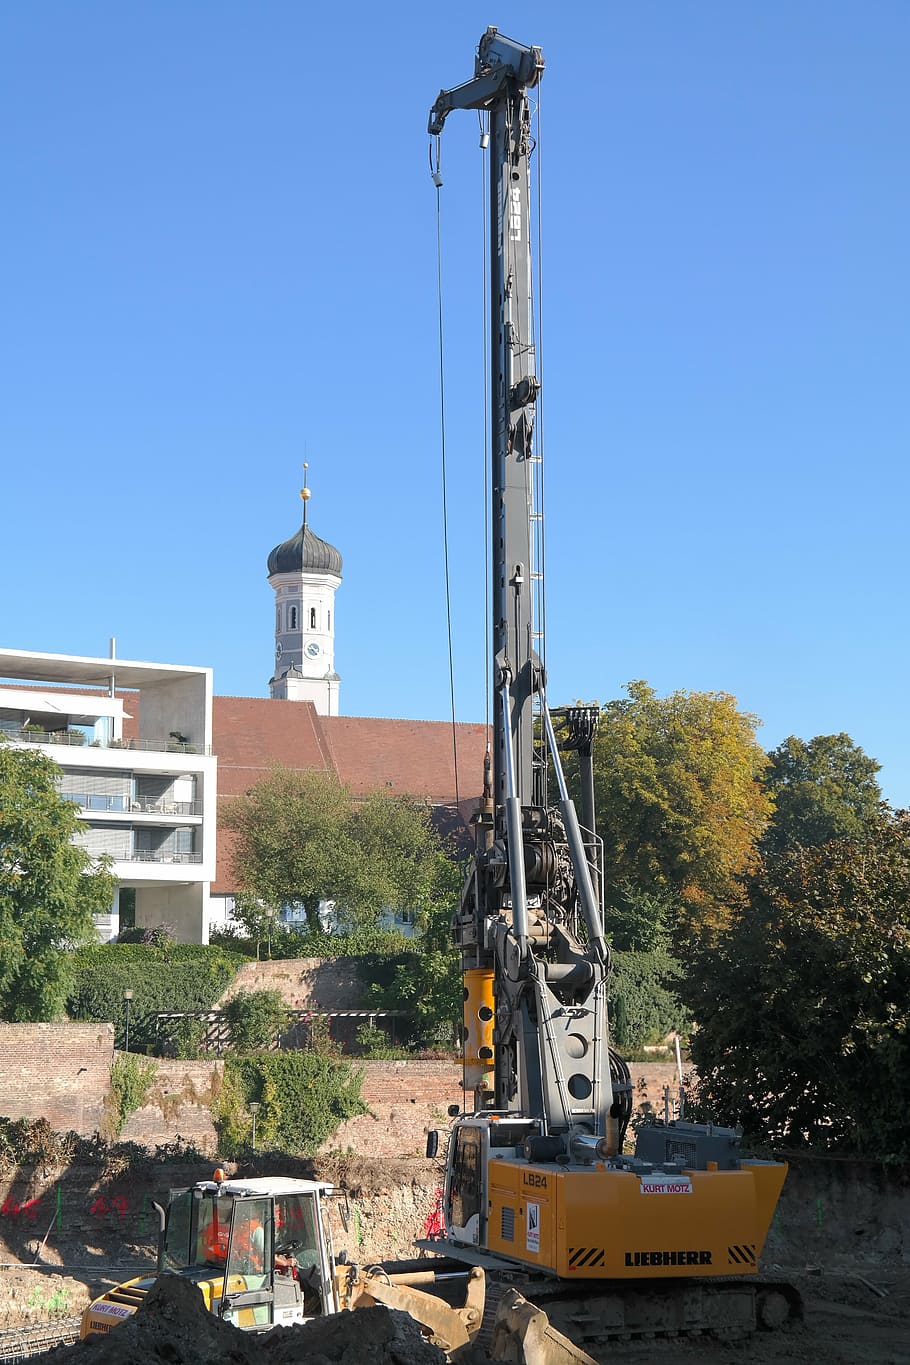 construction work, site, drill, drilling rig, hydraulic, ulm, holy trinity church, architecture, sky, built structure